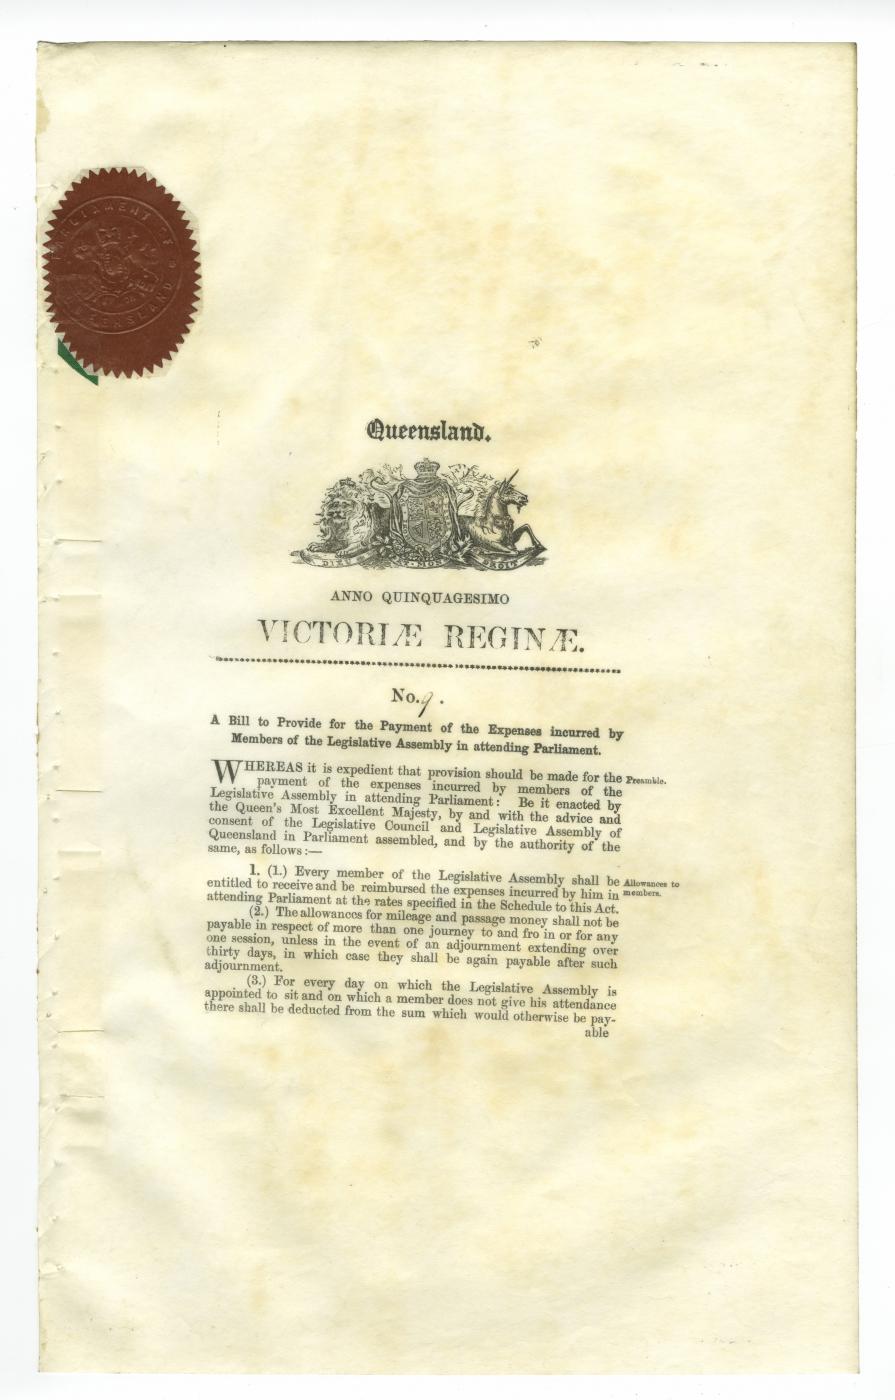 A Bill to provide for the Payment of the Expenses incurred by Members of the Legislative Assembly in attending Parliament